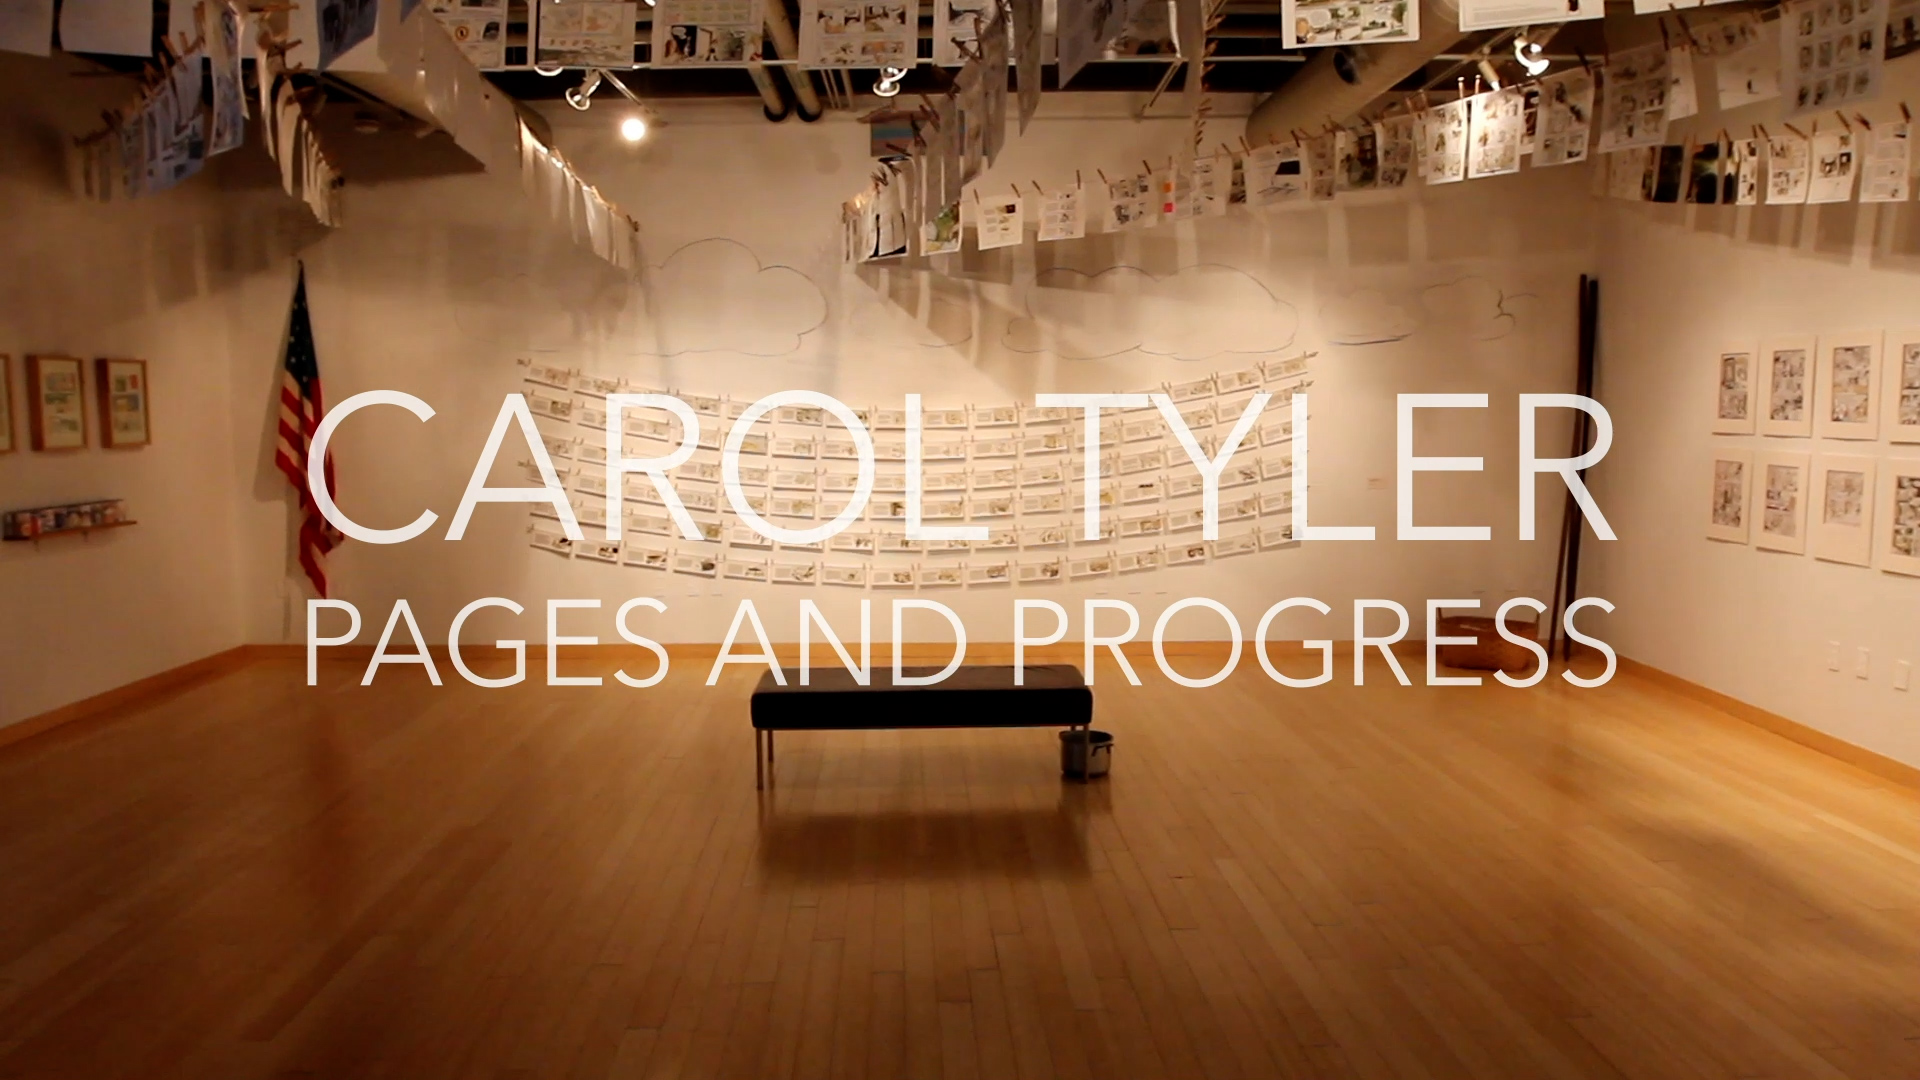 Carol Tyler: Pages and Progress